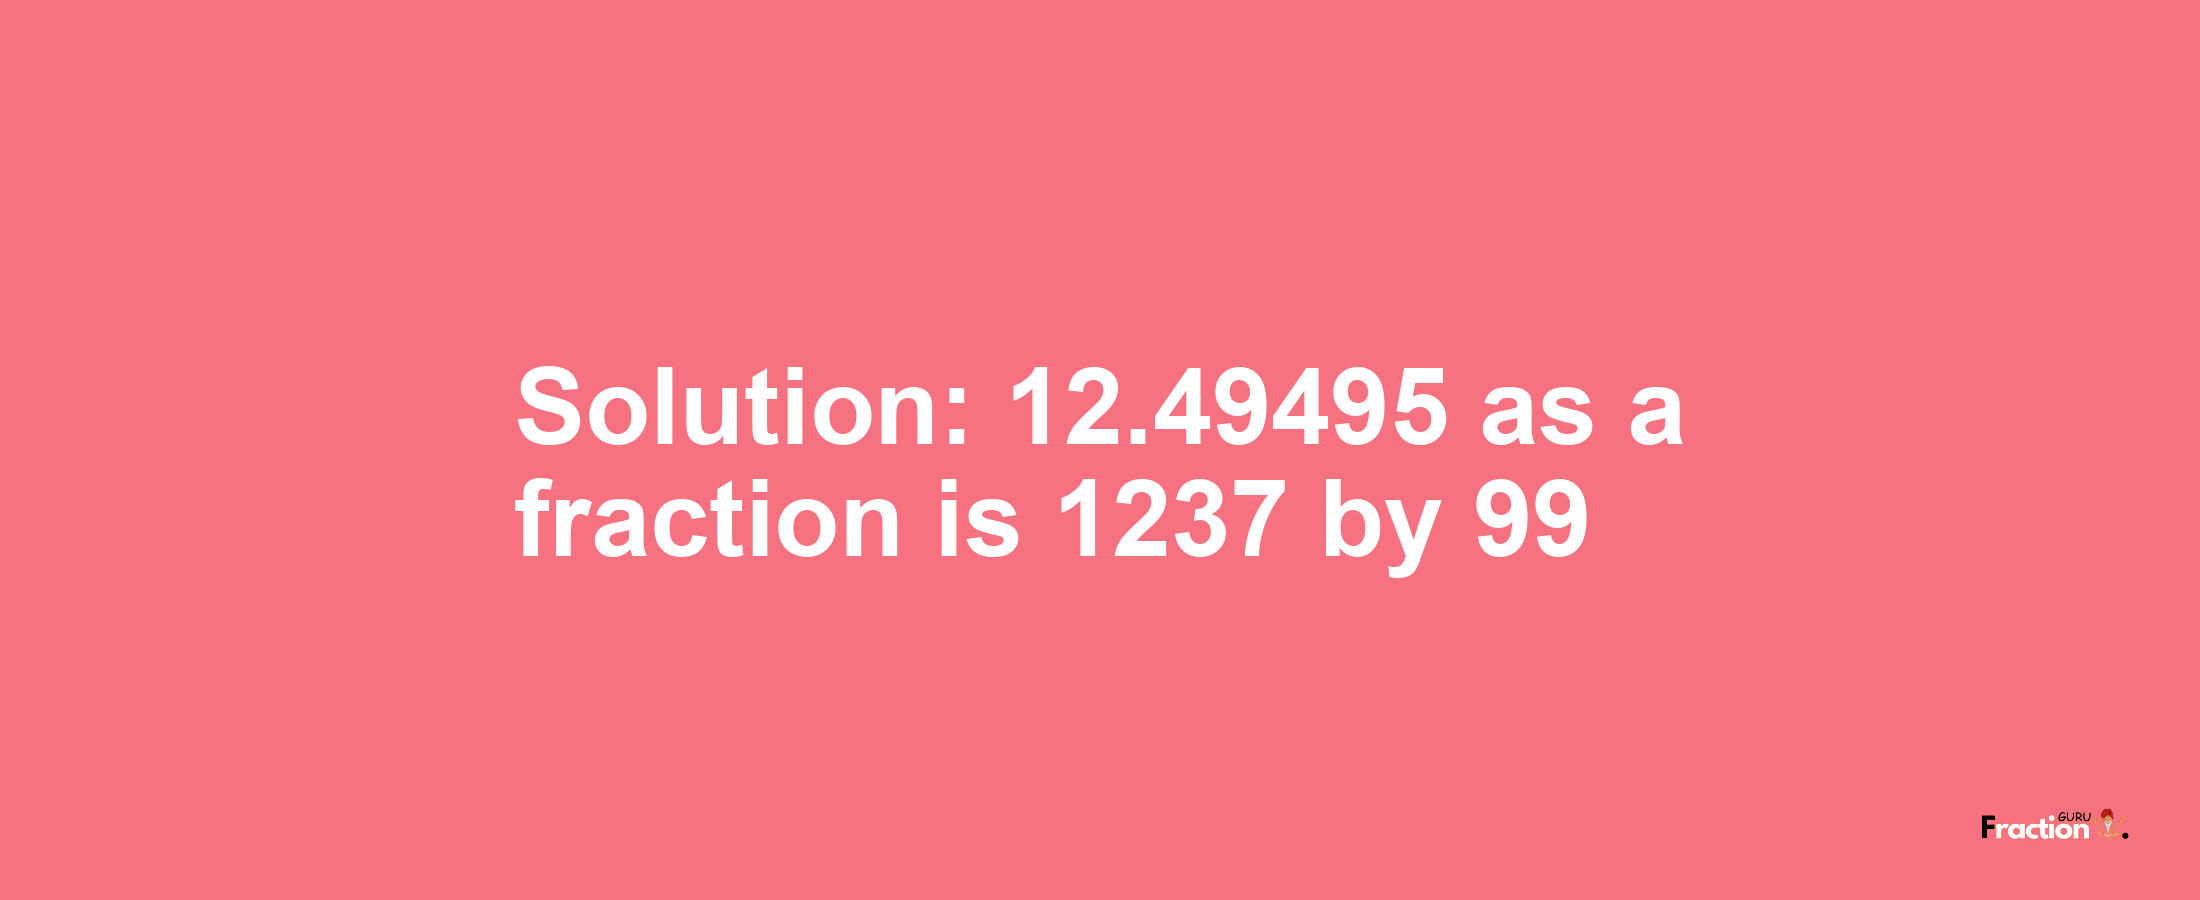 Solution:12.49495 as a fraction is 1237/99